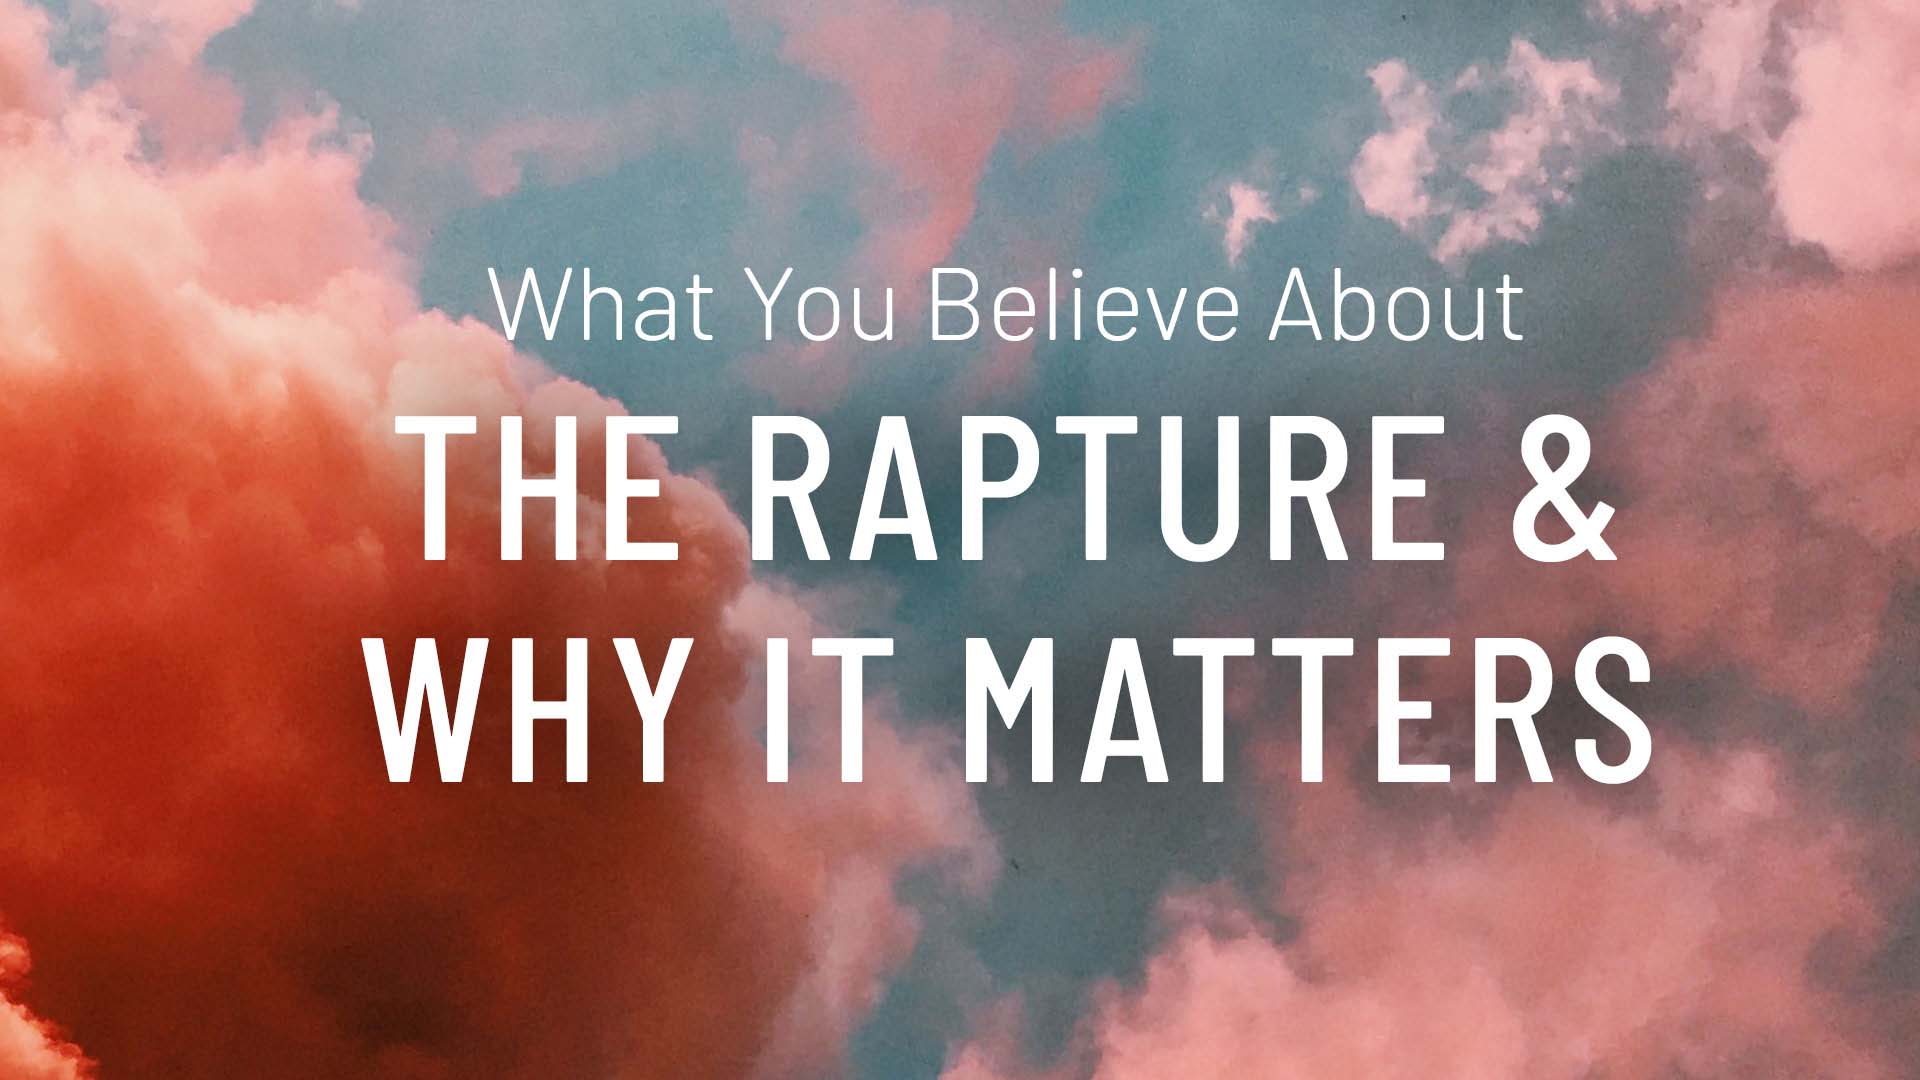 What You Believe About The Rapture and Why It Matters – Continued